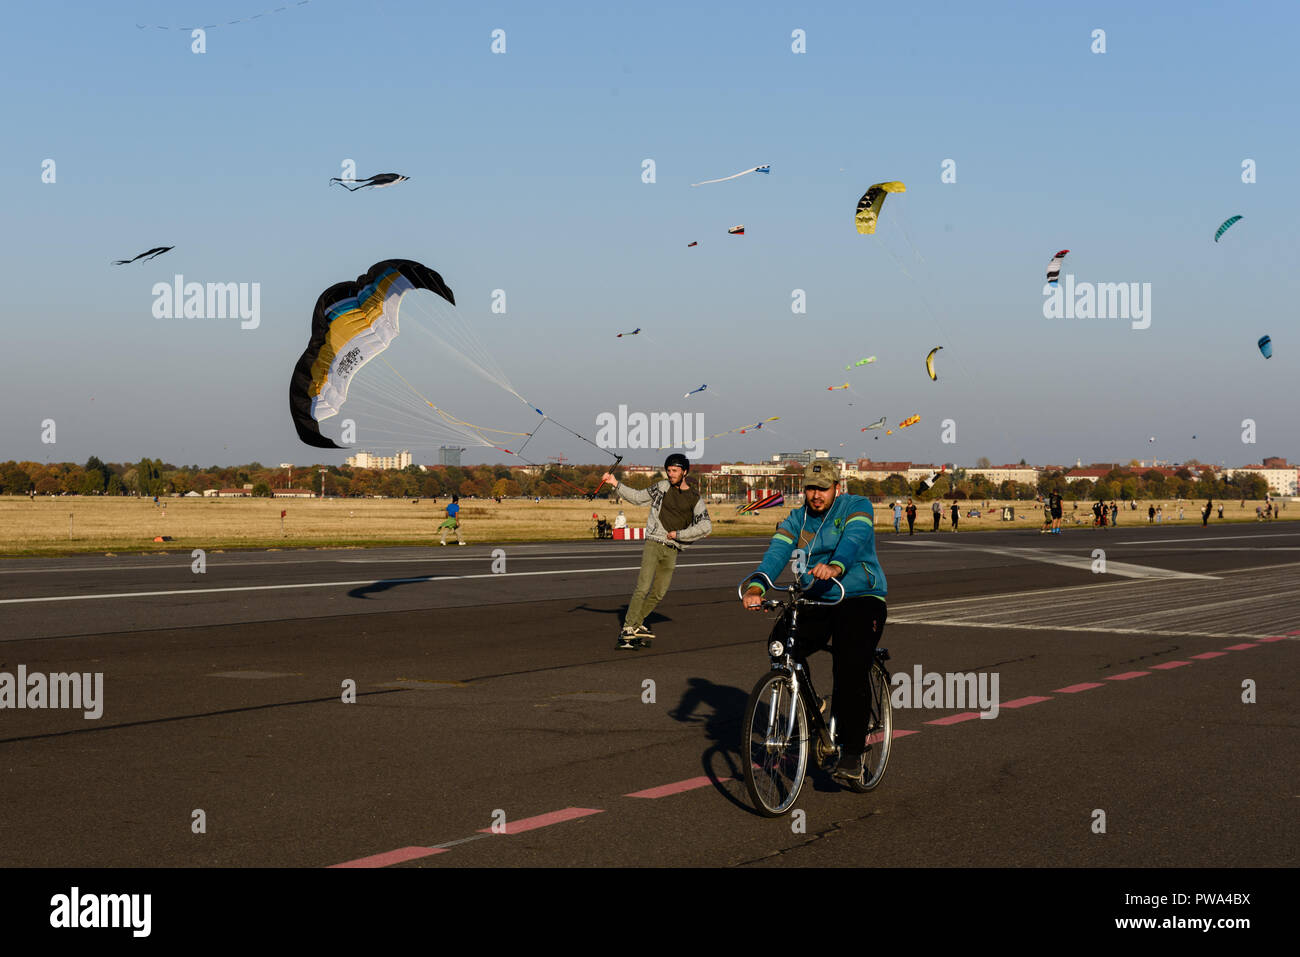 A man is seen riding a bicycle next to a man flying a kite at the Tempelhof field. The good weather in October brings many visitors to the park at the former Tempelhof Airport. Stock Photo